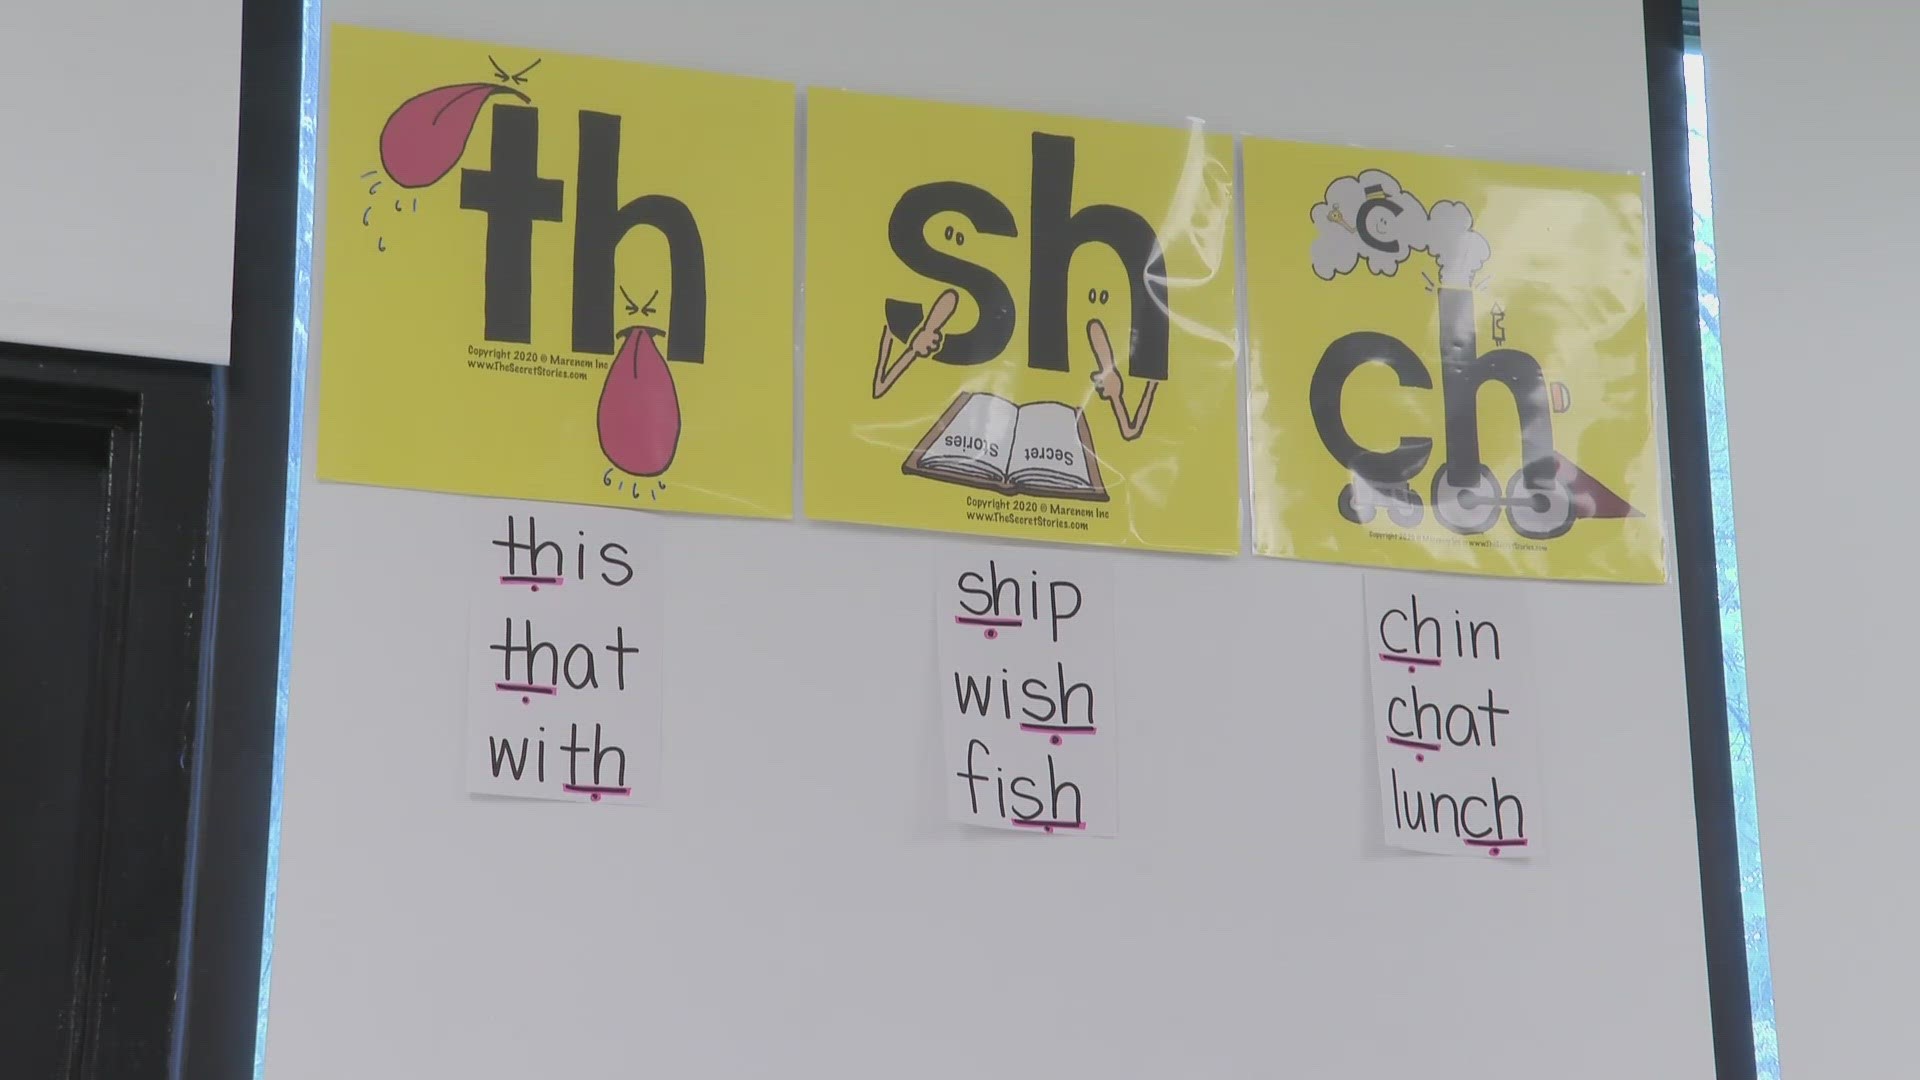 The new standard reading curriculum is based on phonics. It's a way for students to take words into bite-sized parts and be able to sound them out and write them.